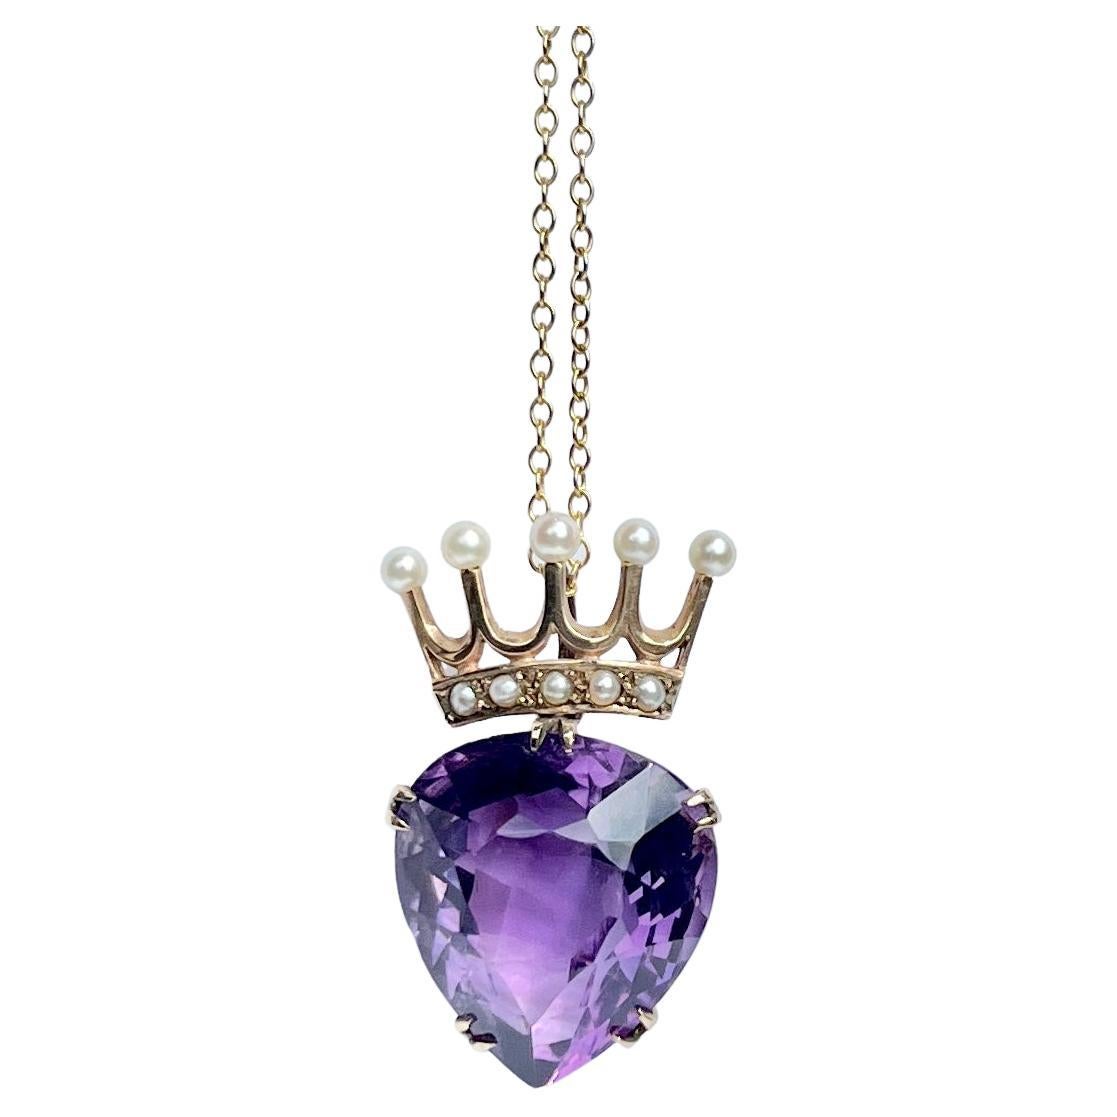 Vintage Luckenbooth Amethyst and 9 Carat Gold Pendant Necklace